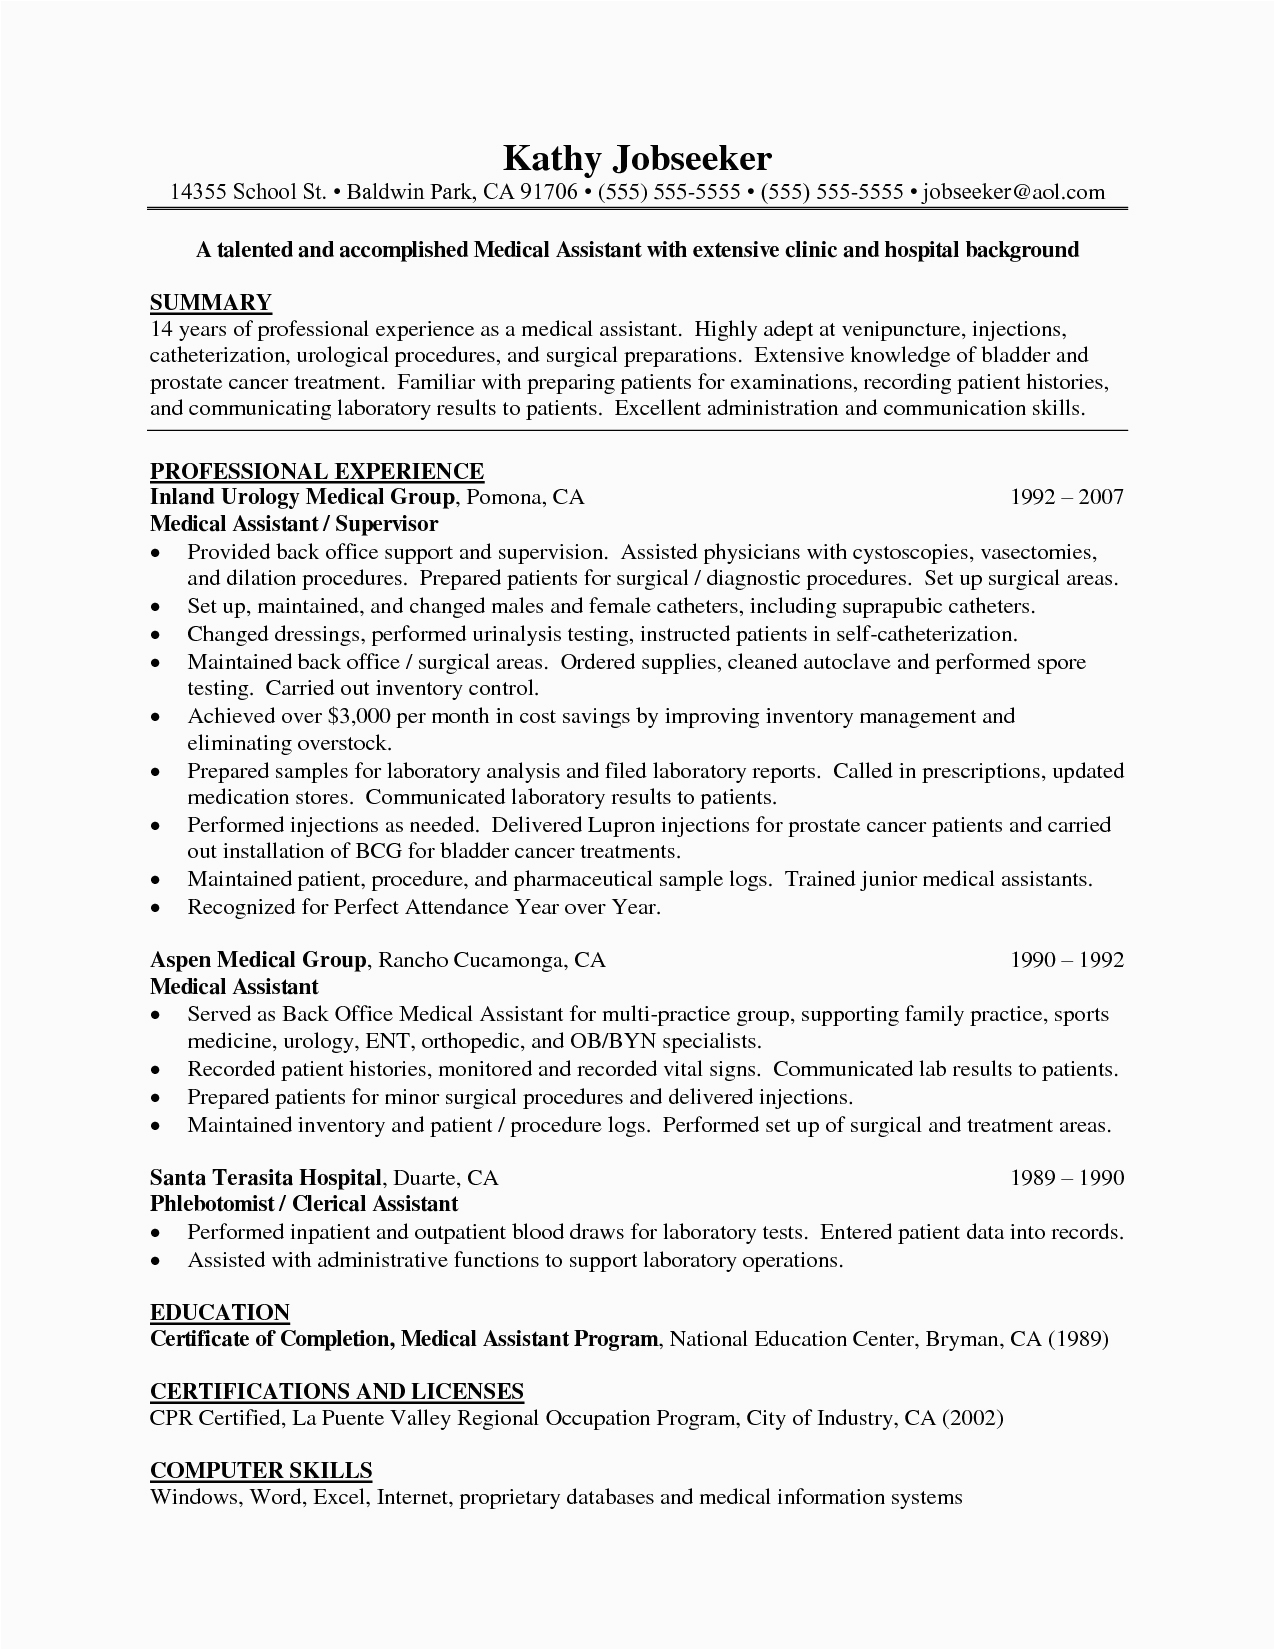 Resume Sample Medical assistant No Experience Healthcare Administration Resume with No Experience All